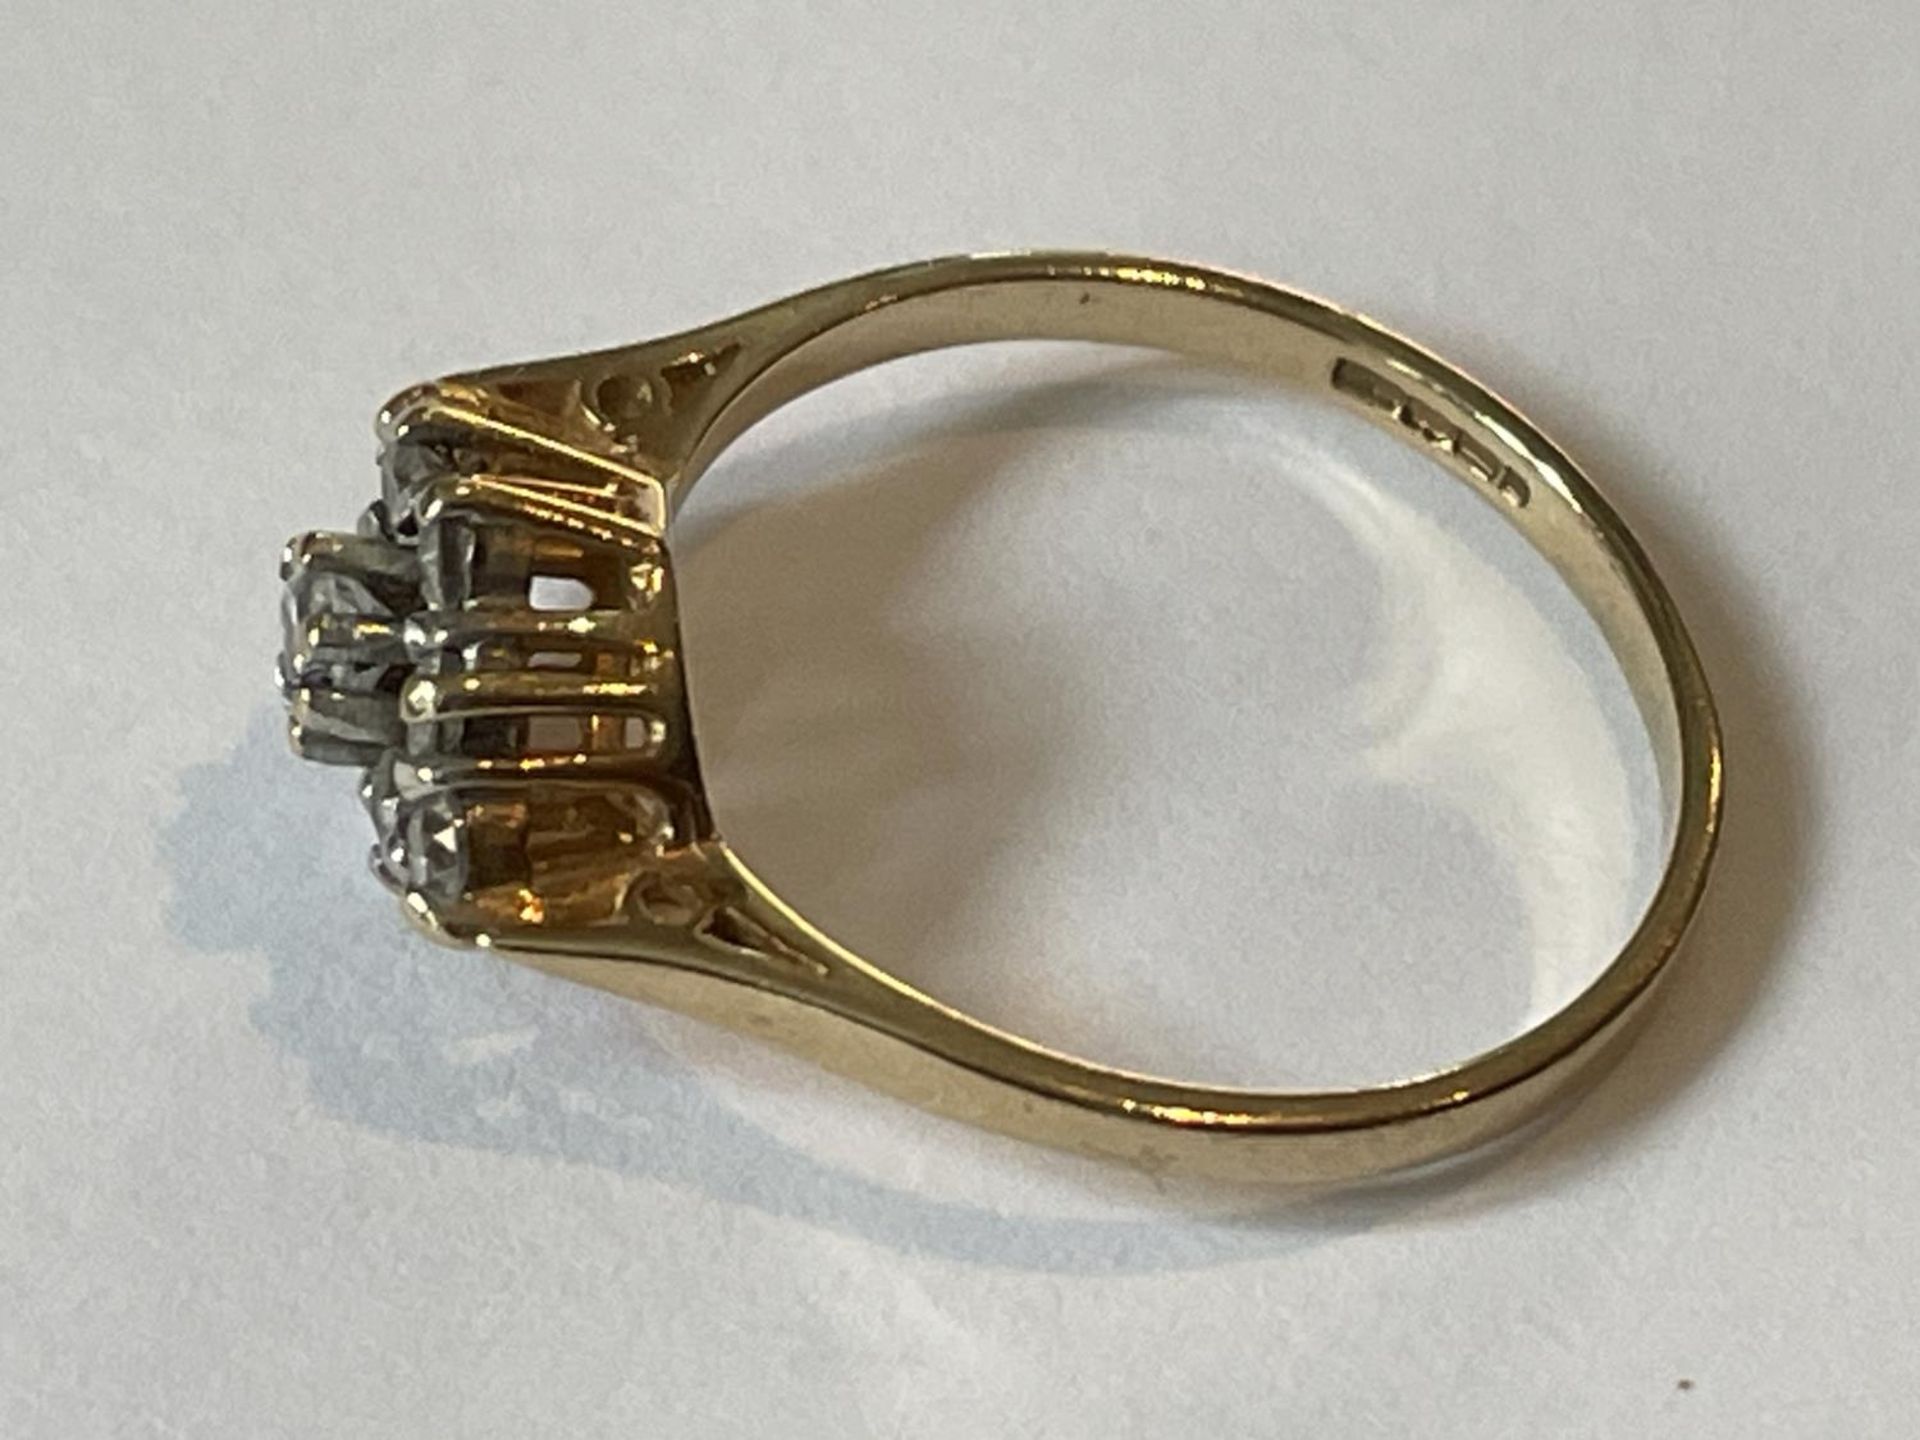 A 9 CARAT GOLD RING WITH NINE CUBIC ZIRCONIAS IN A DIAMOND PATTERN SIZE P - Image 2 of 3